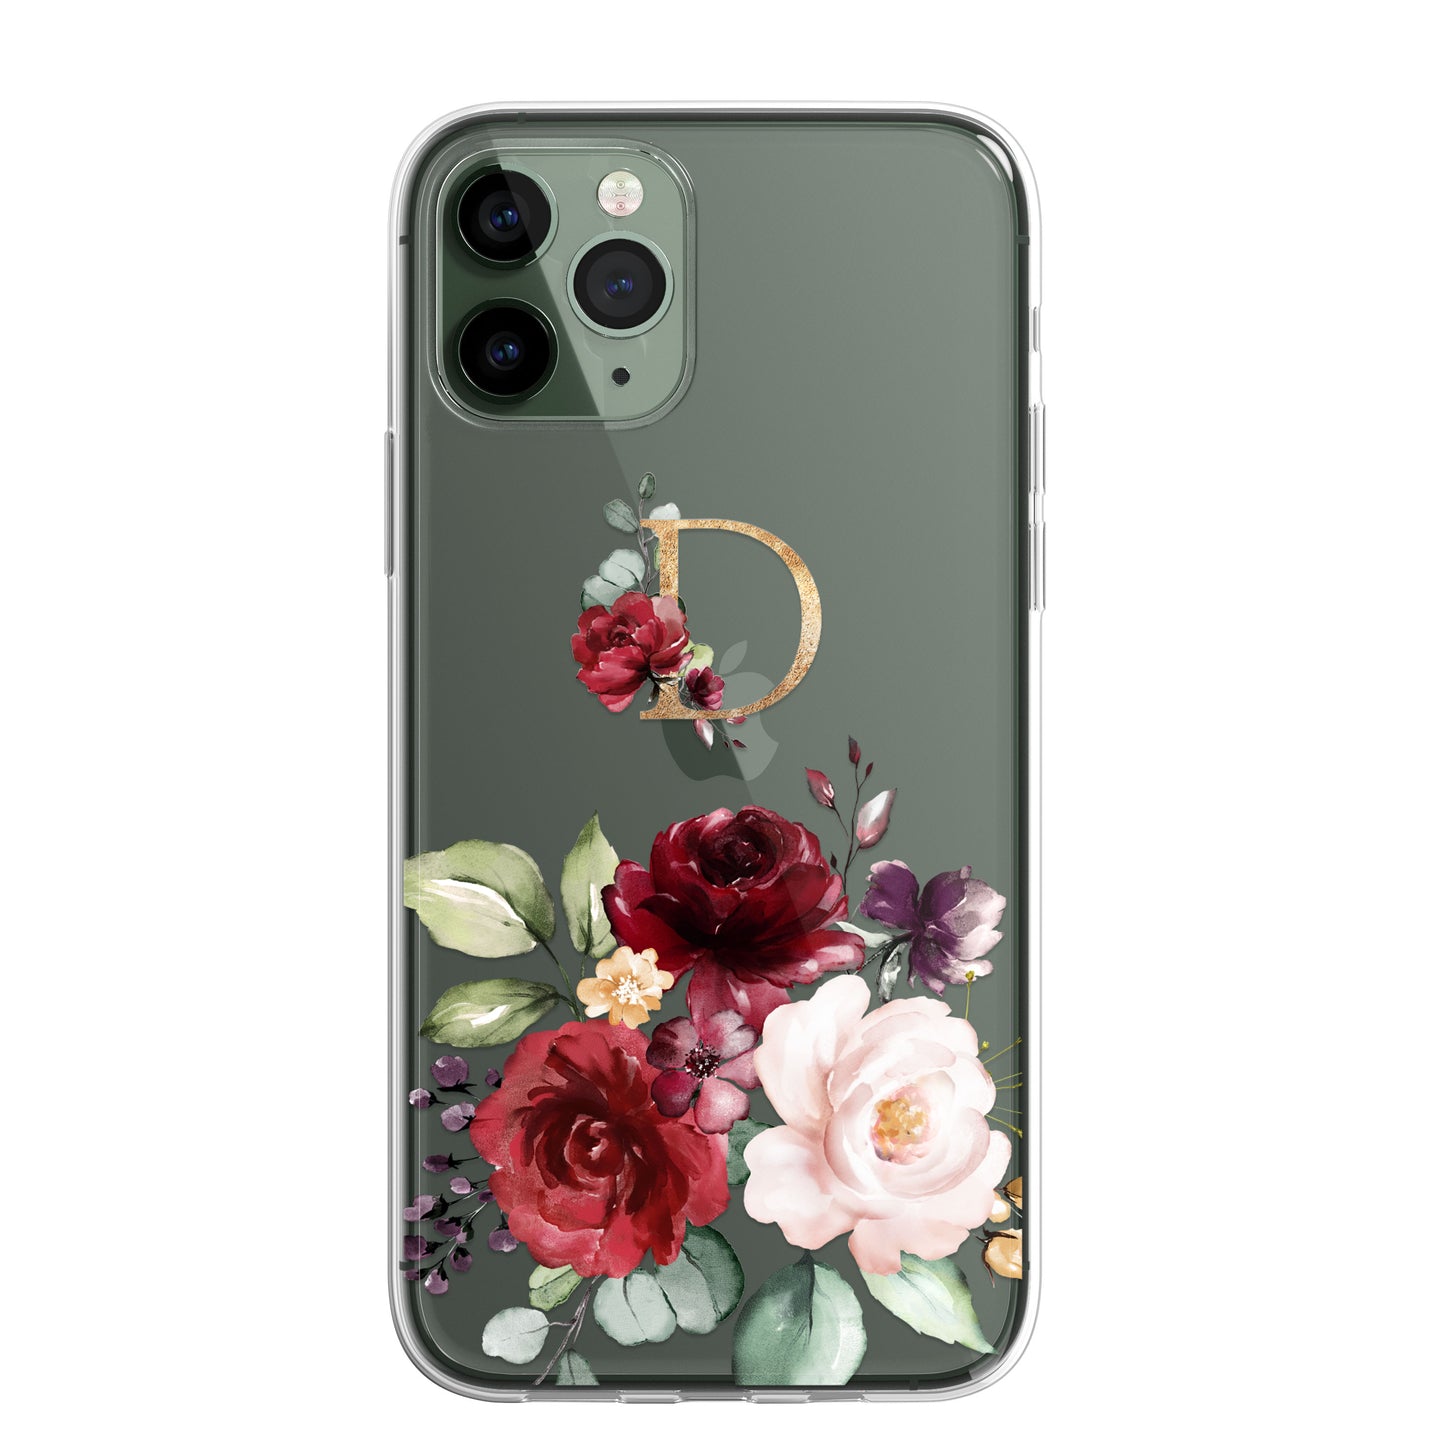 Personalised Floral CLEAR Phone Cover Case Custom For iPhone 12 Pro Max Mini +